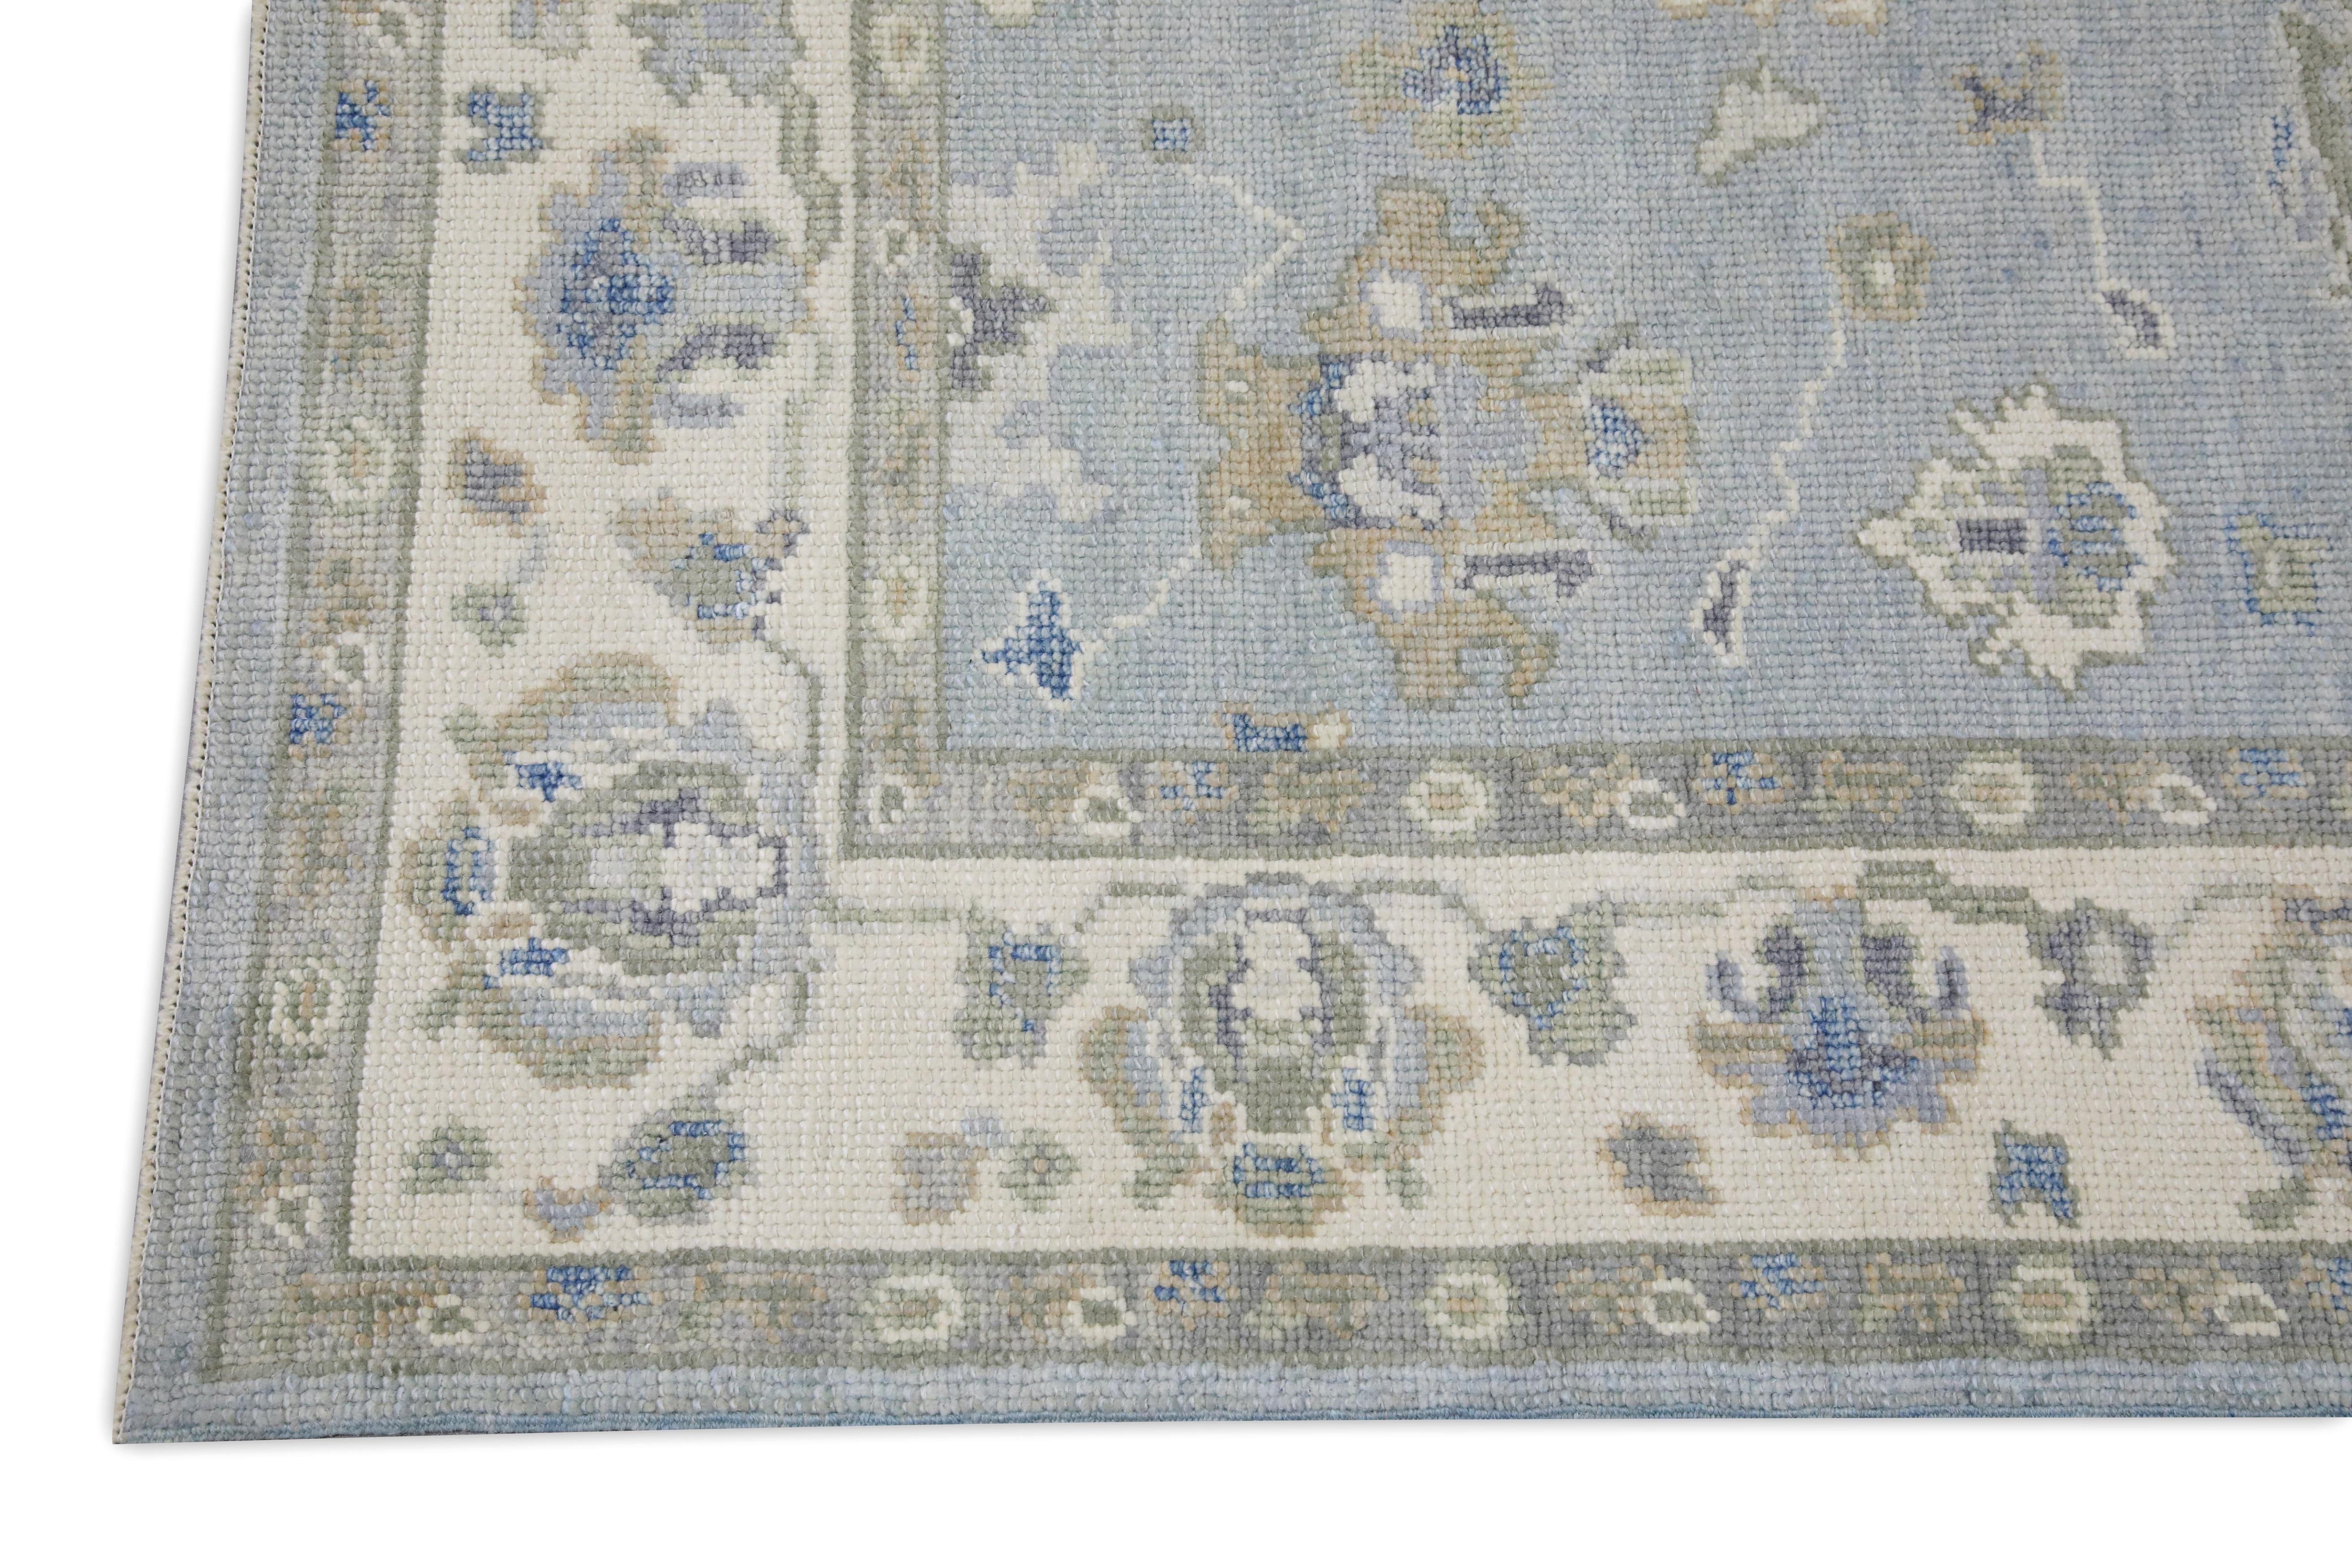 Vegetable Dyed Blue Colorful Floral Design Handwoven Wool Turkish Oushak Rug 5' X 9'6